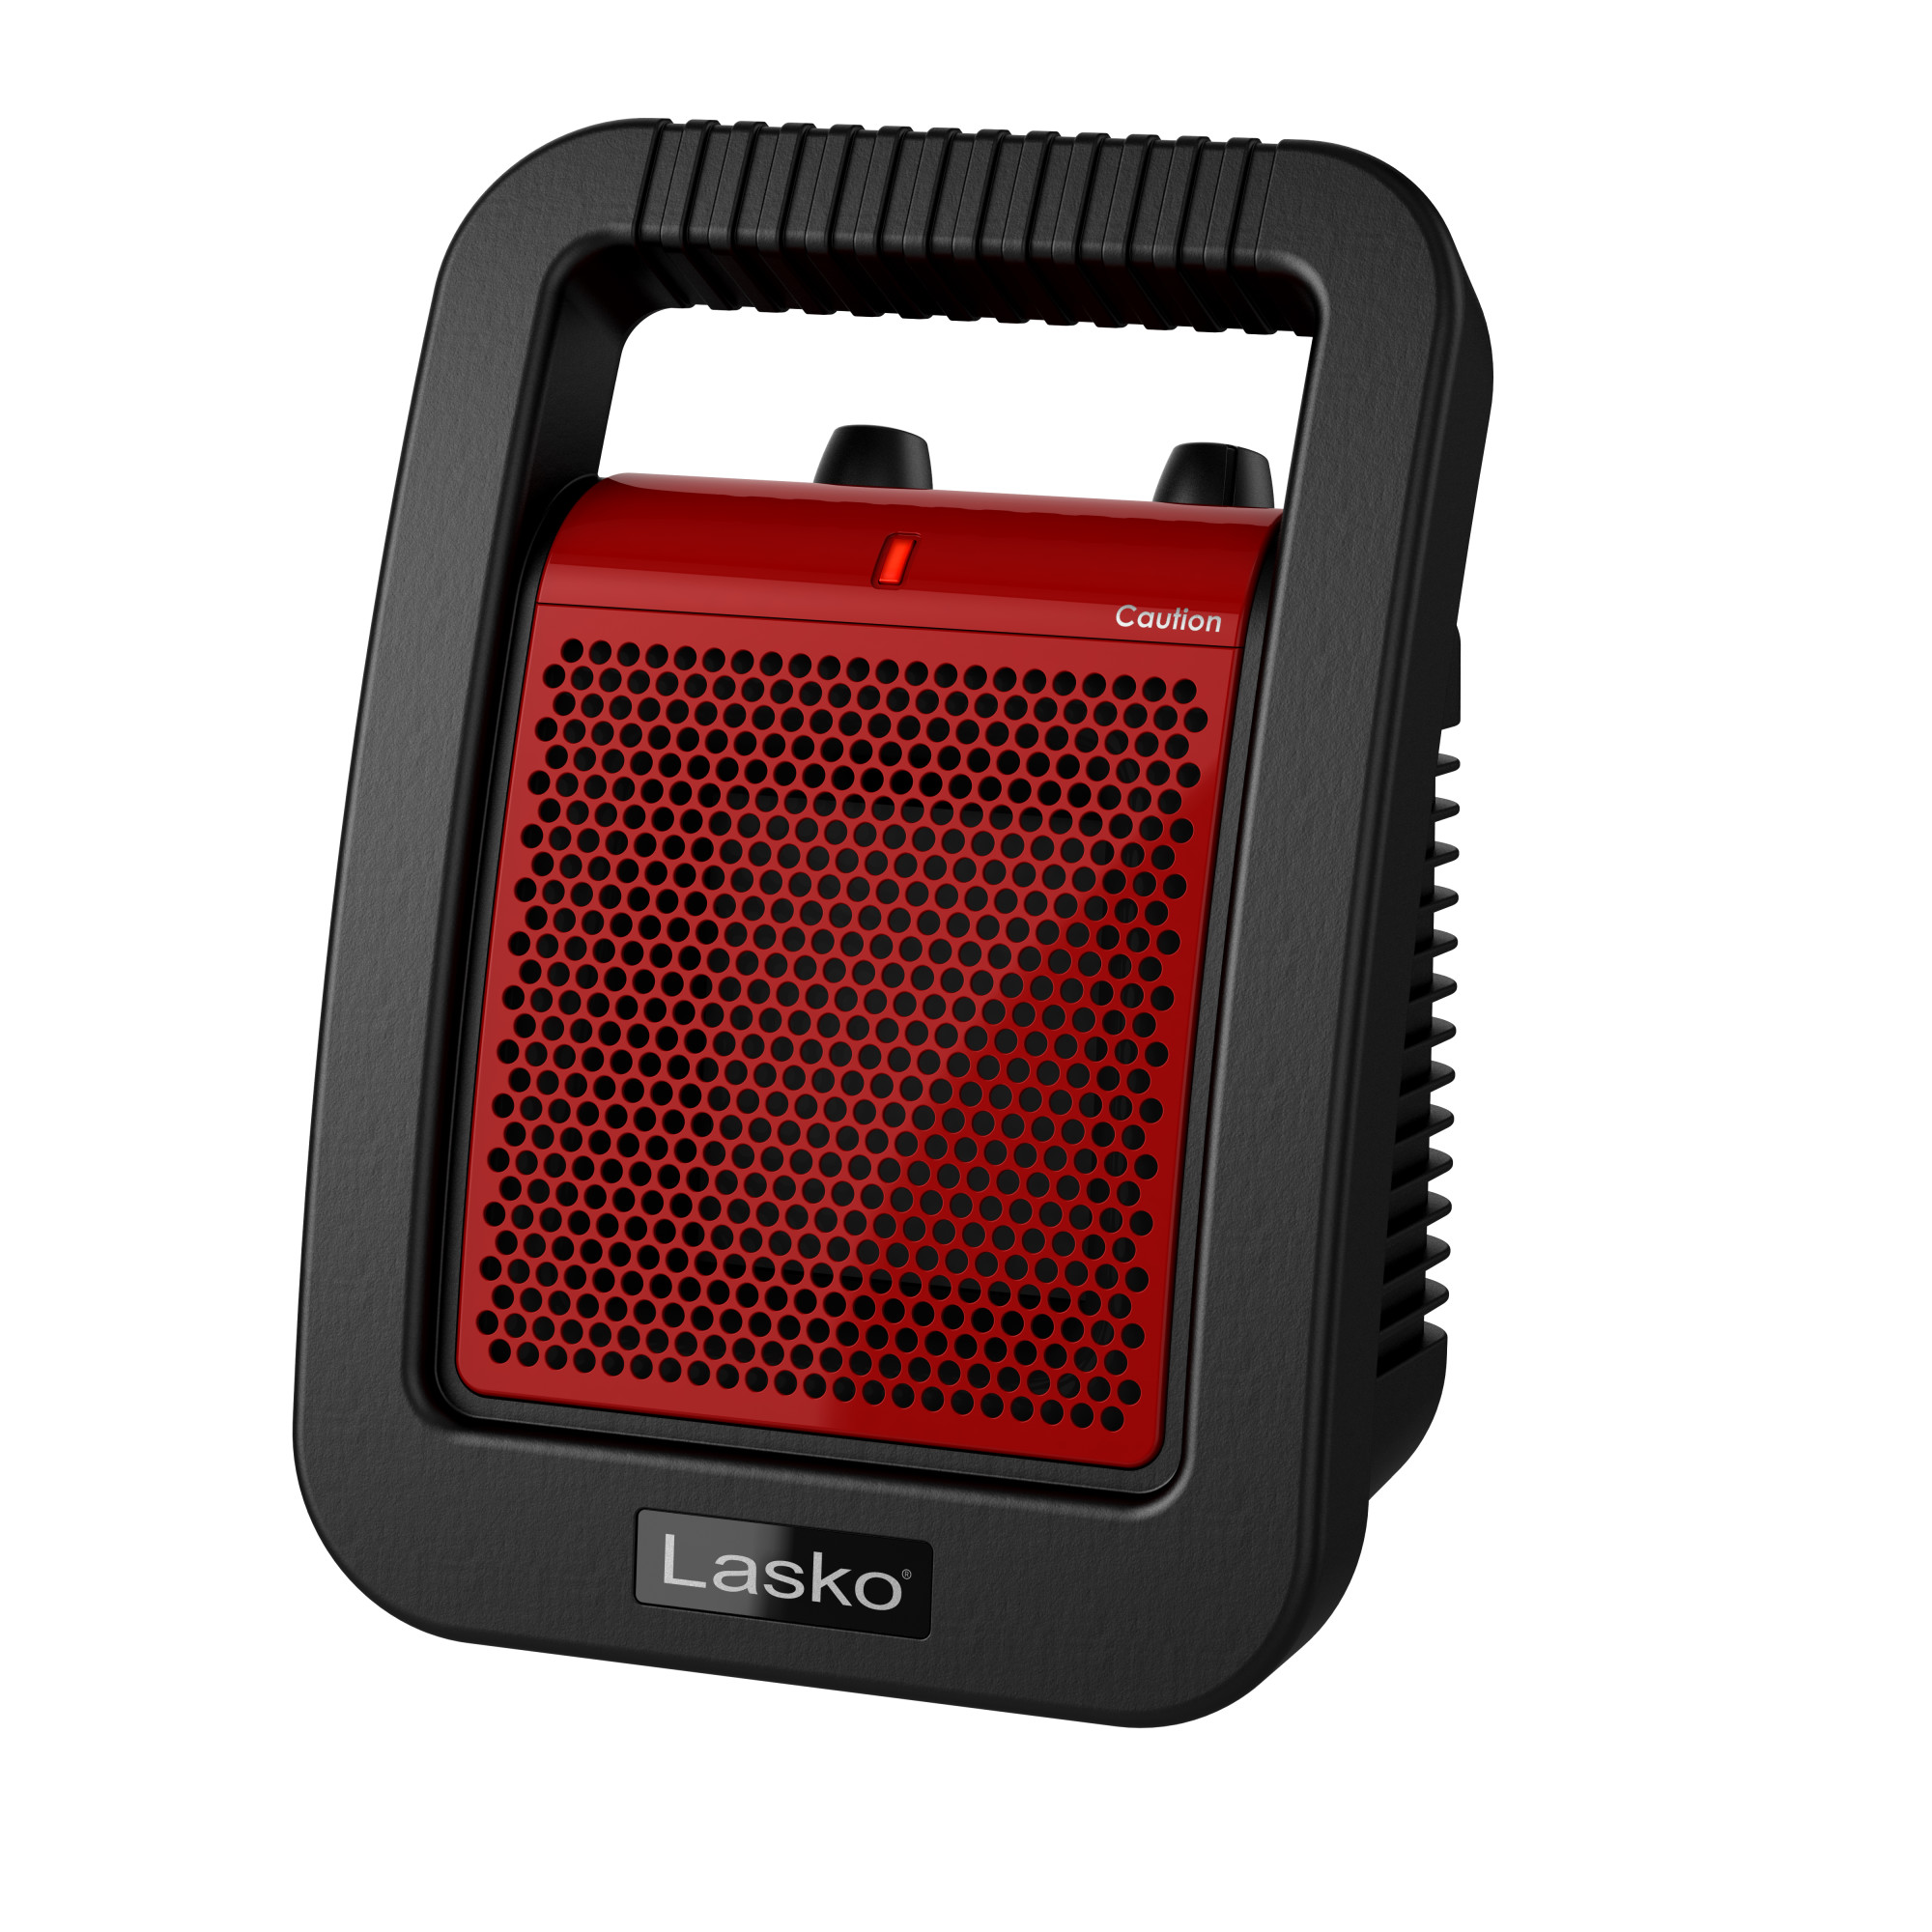 Lasko 12" Utility Ceramic Heater with Adjustable Thermostat, Black/Red, CU12110, New - image 1 of 5